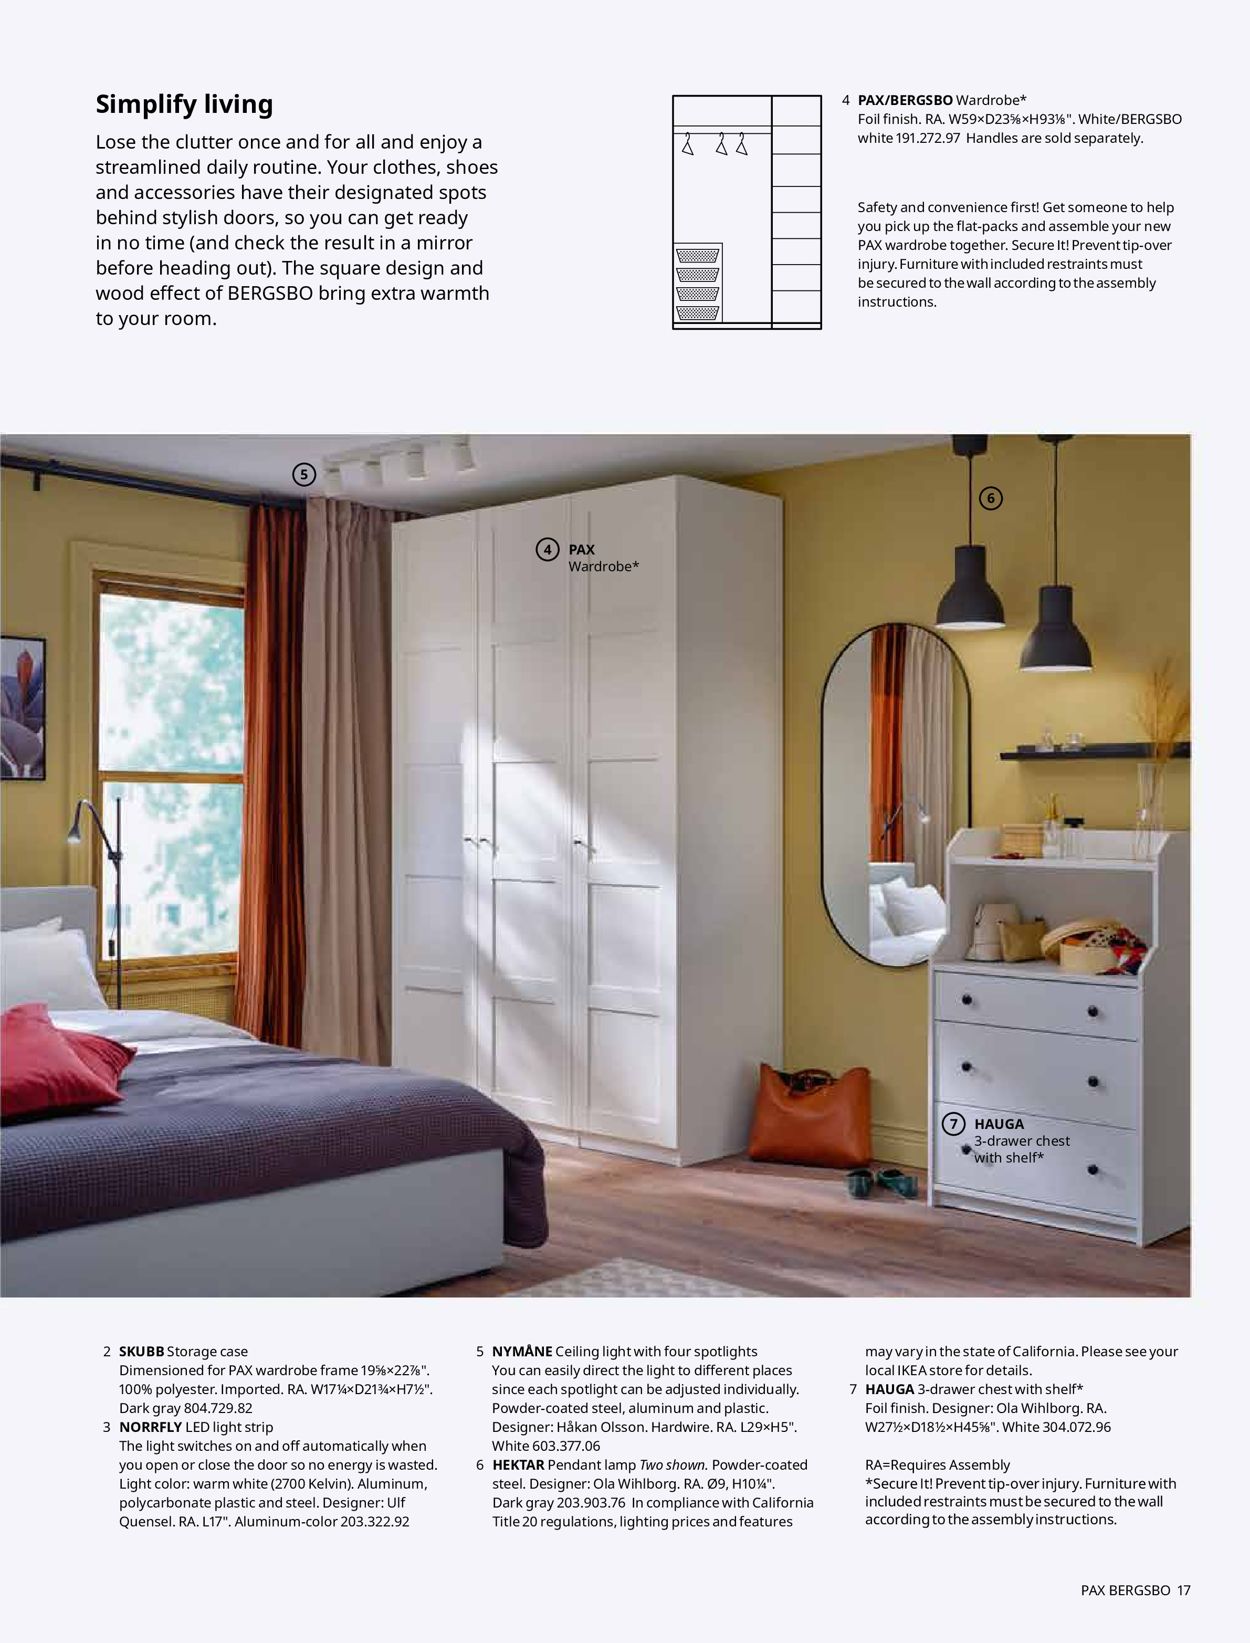 IKEA Current weekly ad 06/03 - 12/31/2022 [17] - frequent-ads.com